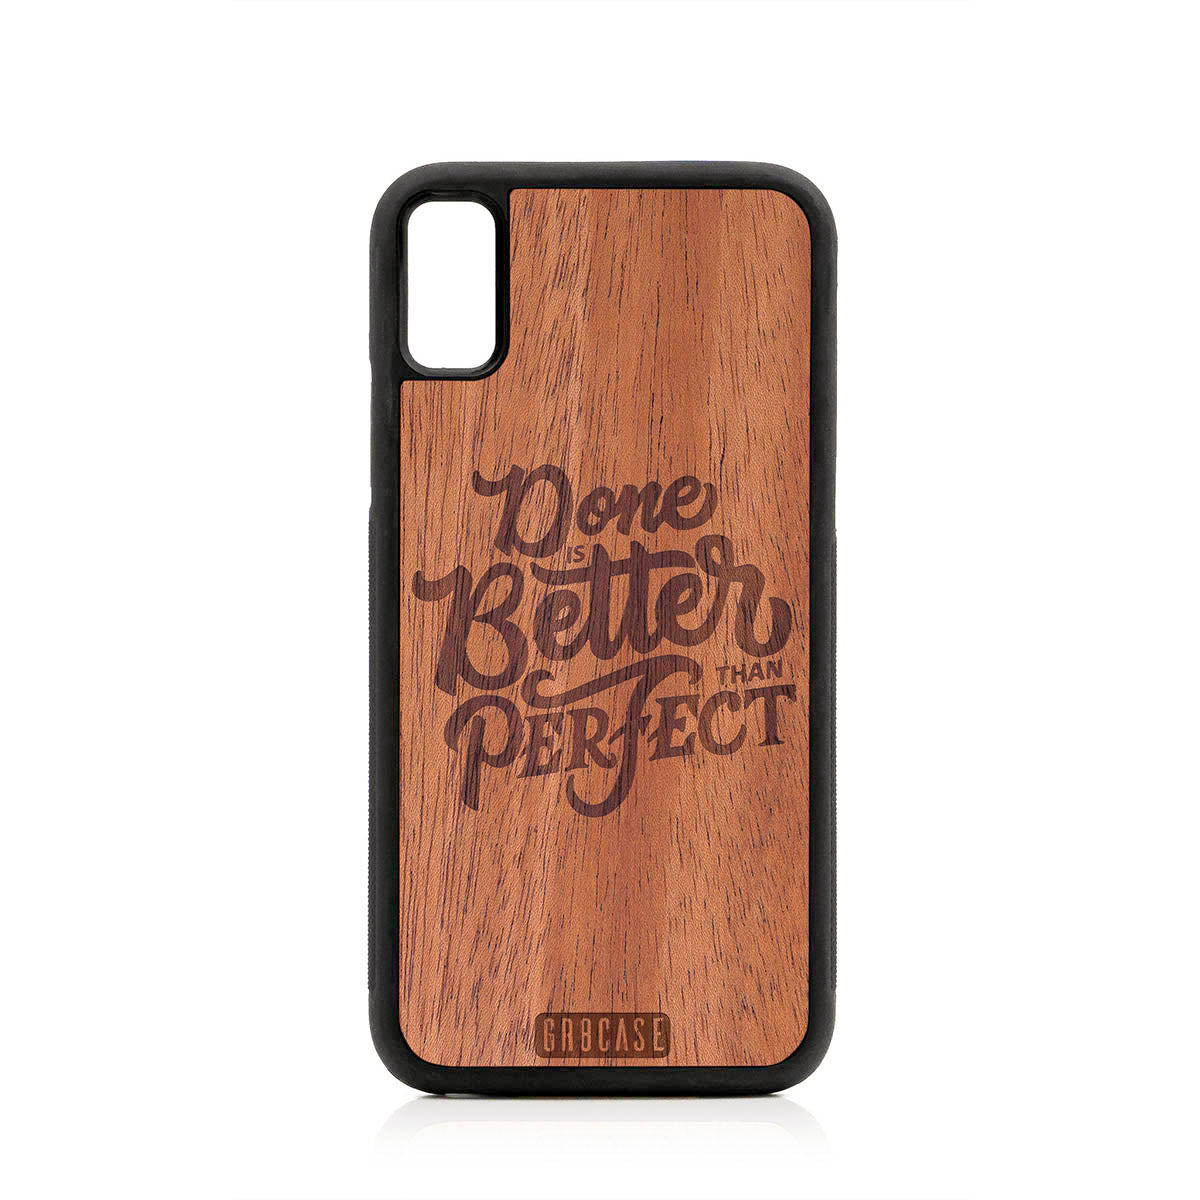 Done Is Better Than Perfect Design Wood Case For iPhone XR by GR8CASE